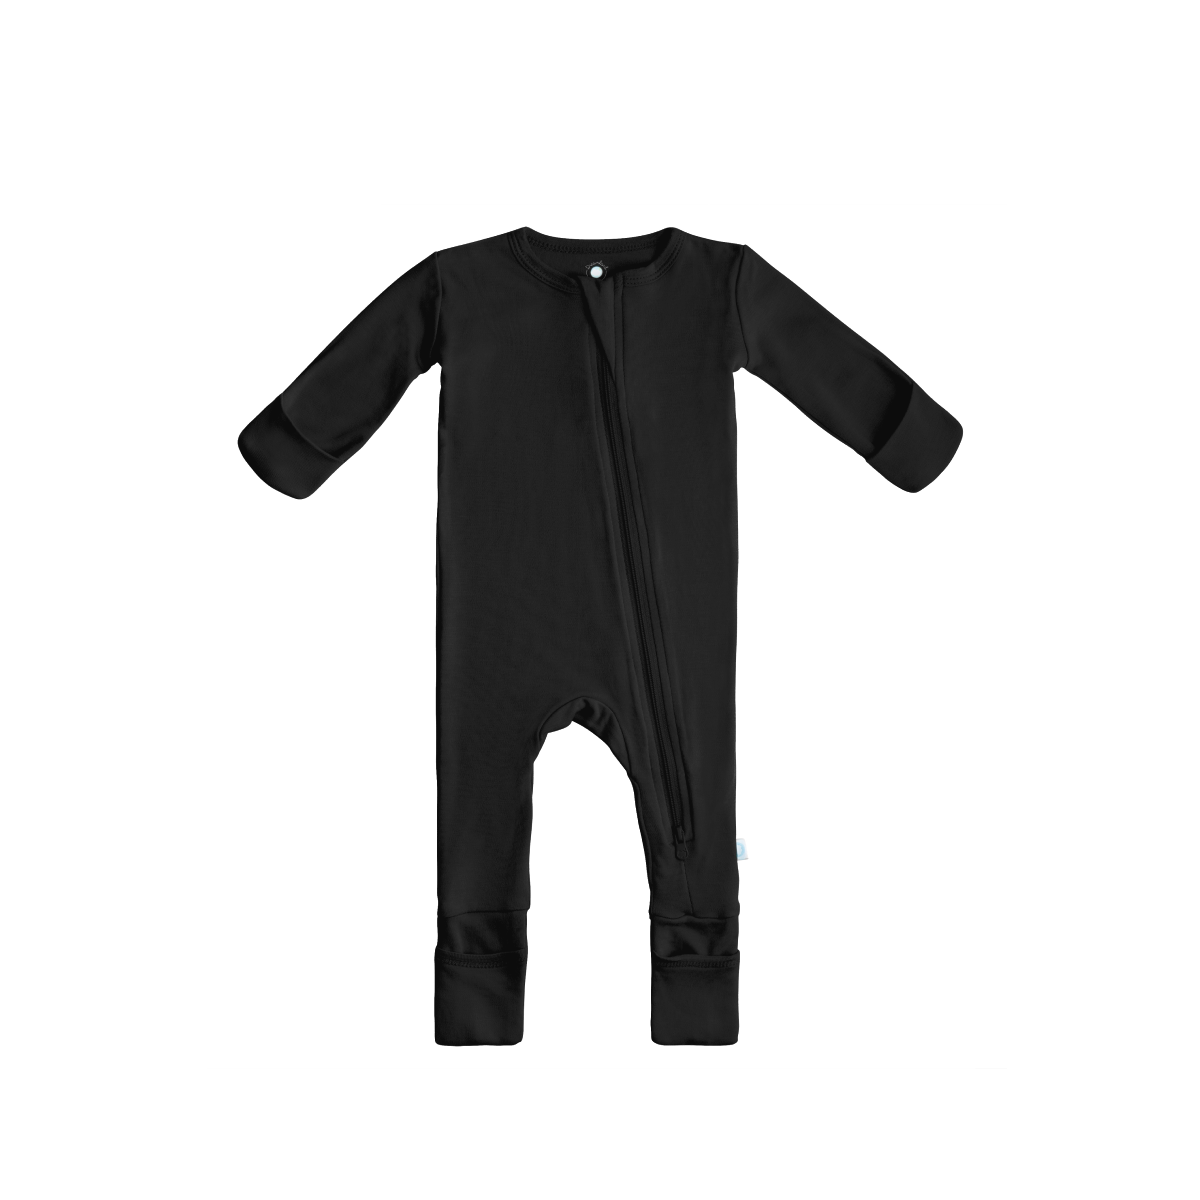 Baby Bamboo Pajamas w/ DreamCuffs - Solids